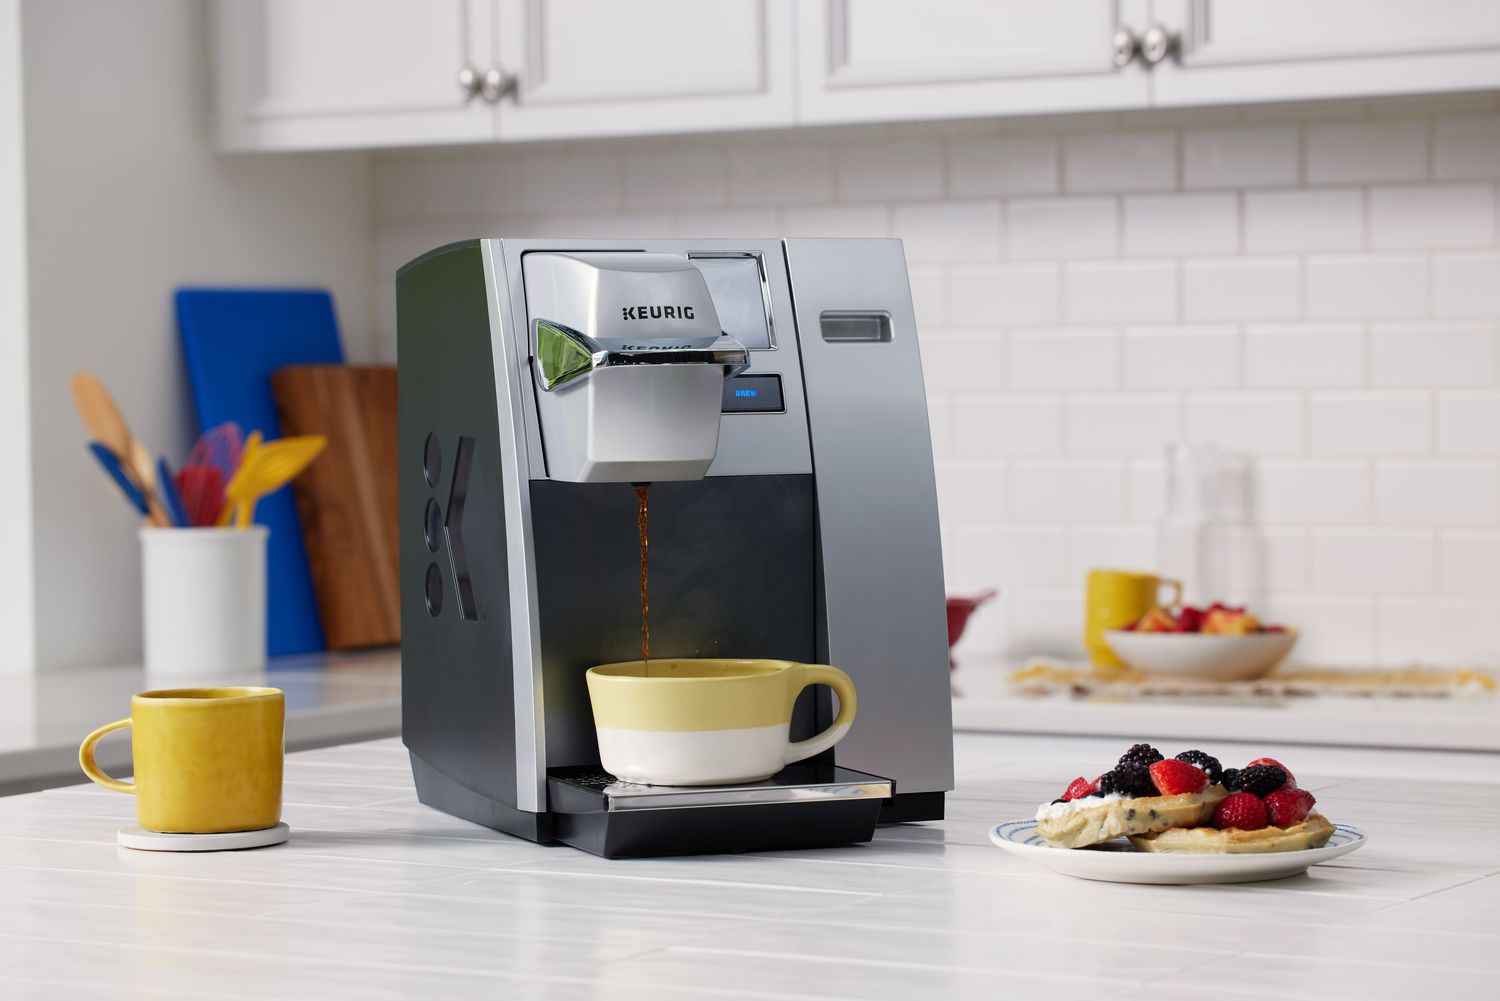 Keurig K155 OfficePro Premier Brewing System pouring coffee into a cup next to a plate of pancakes